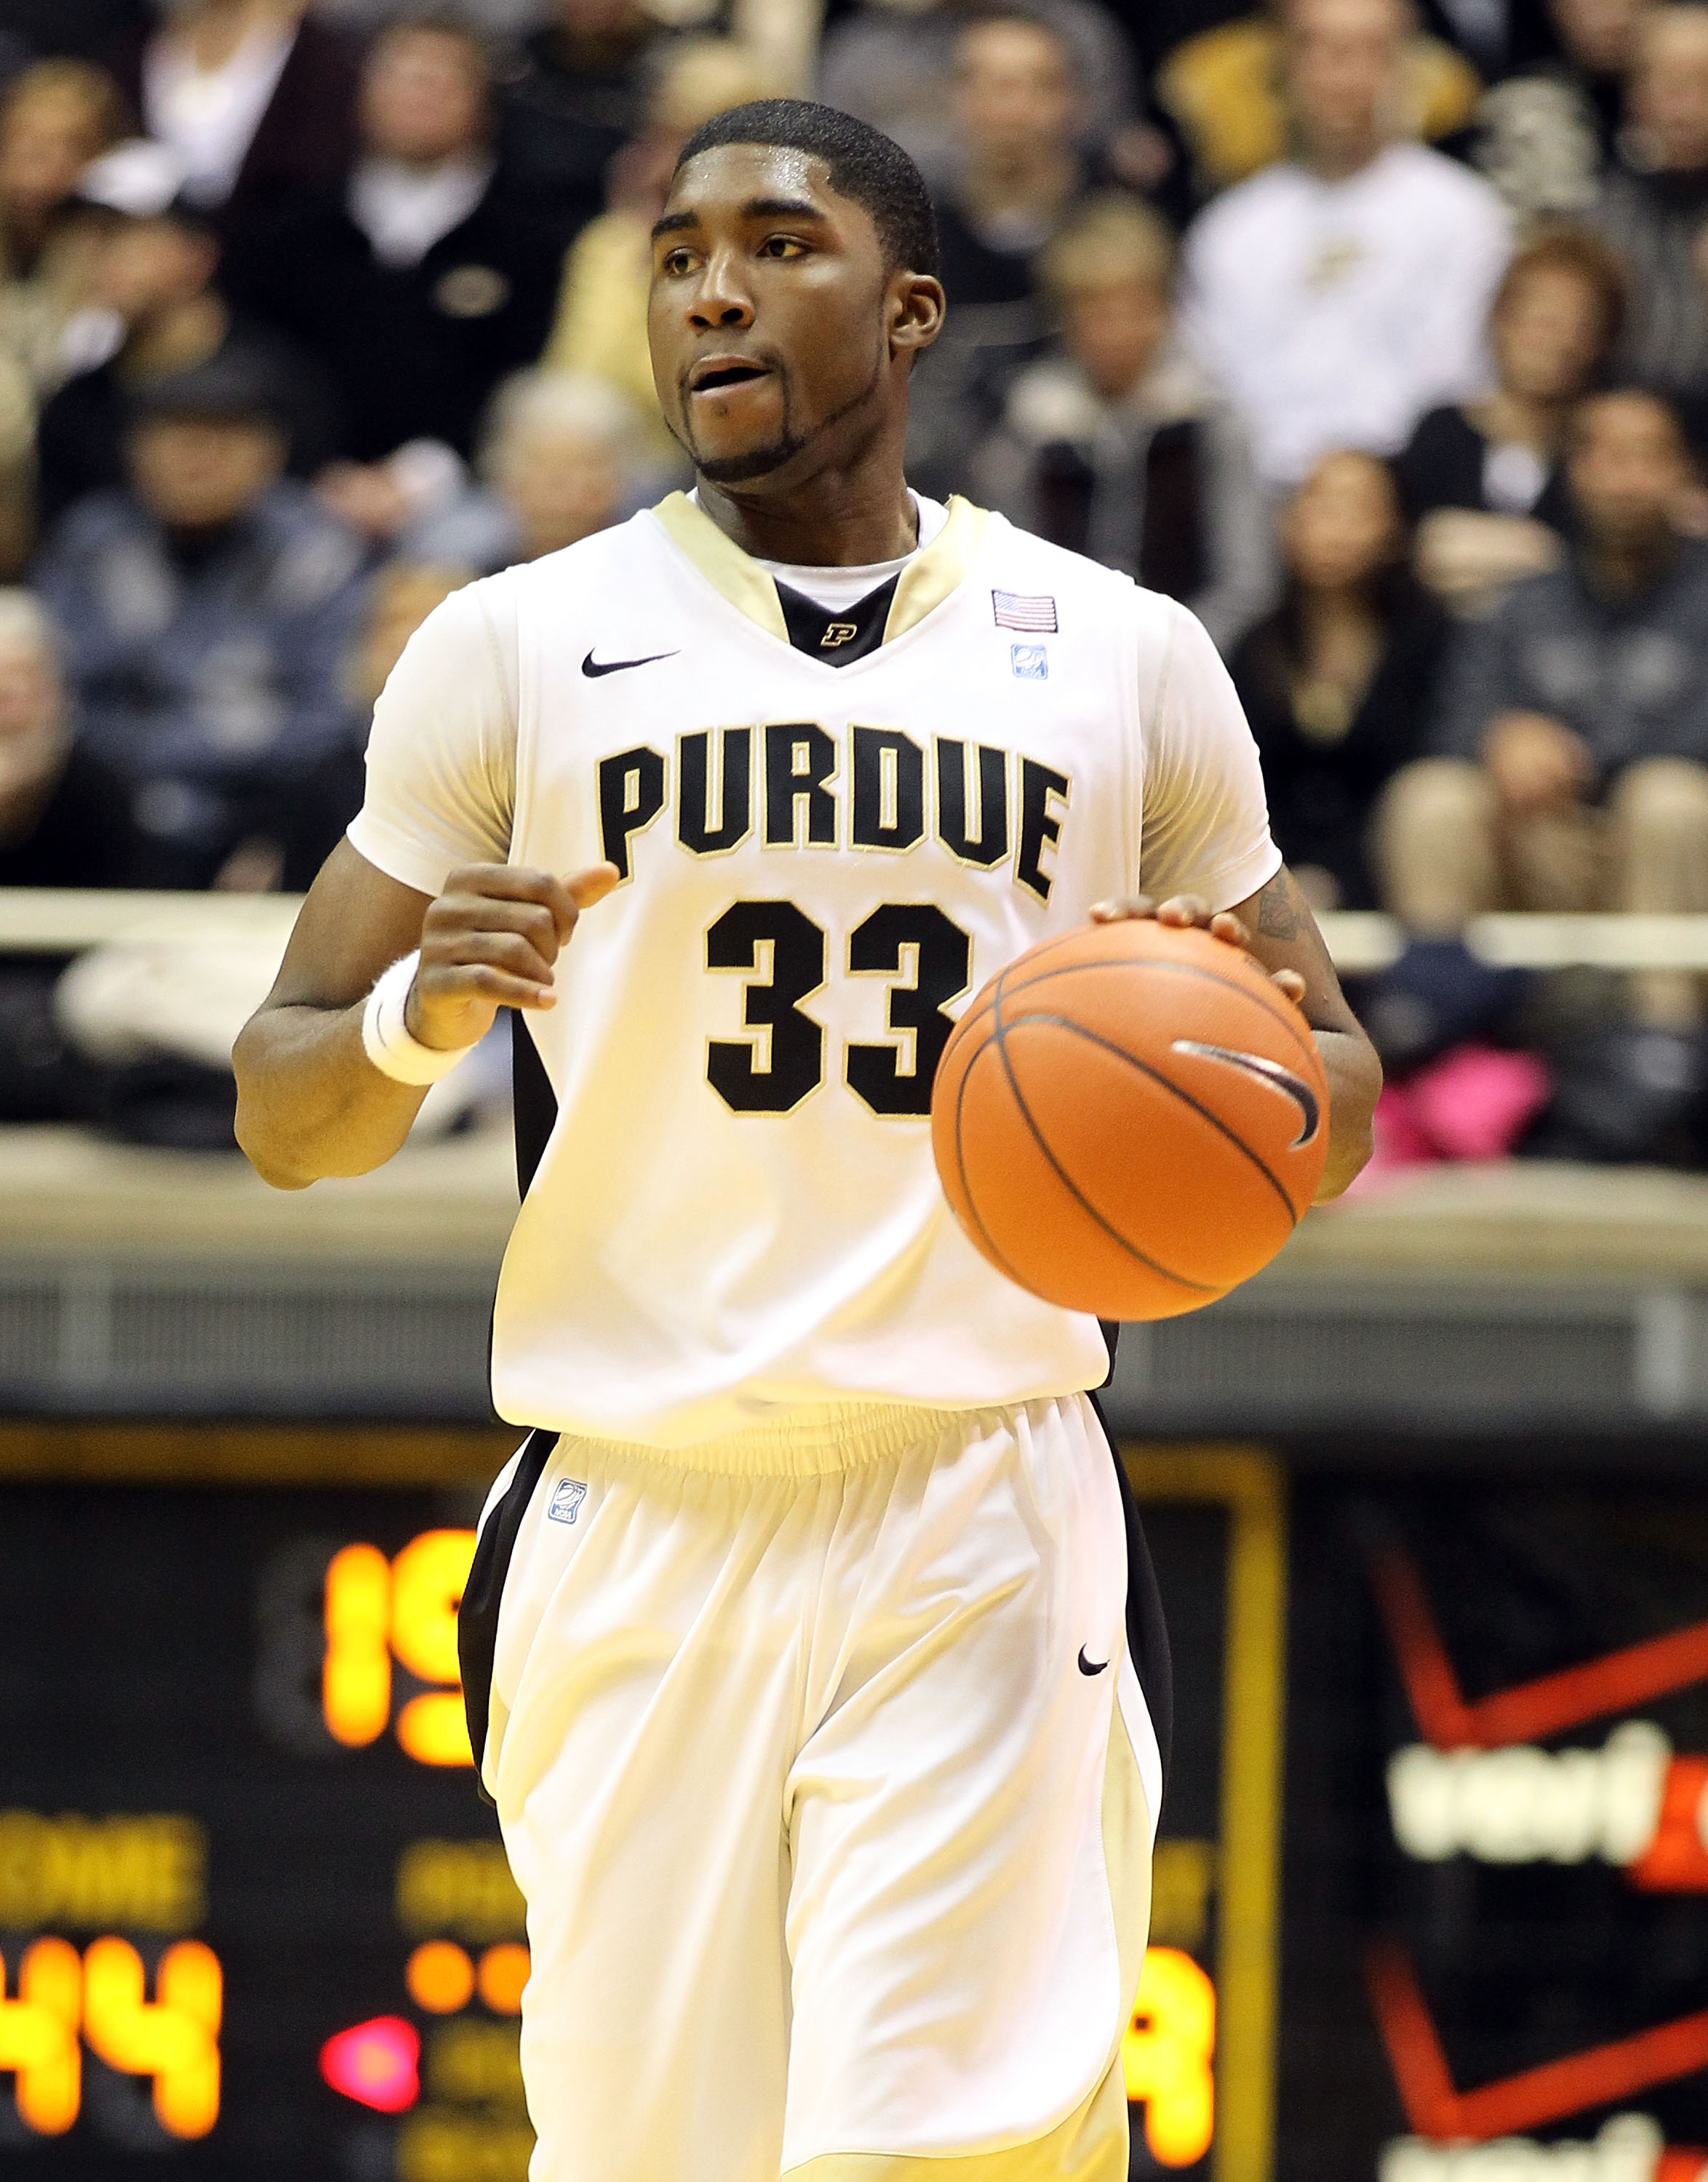 WEST LAFAYETTE, IN - JANUARY 09:  E' Twaun Moore #33 of the Purdue Boilermakers brings the ball up court against the Iowa Hawkeyes during the Big Ten Conference game at Mackey Arena on January 9, 2011 in West Lafayette, Indiana. Purdue won 75-52.  (Photo